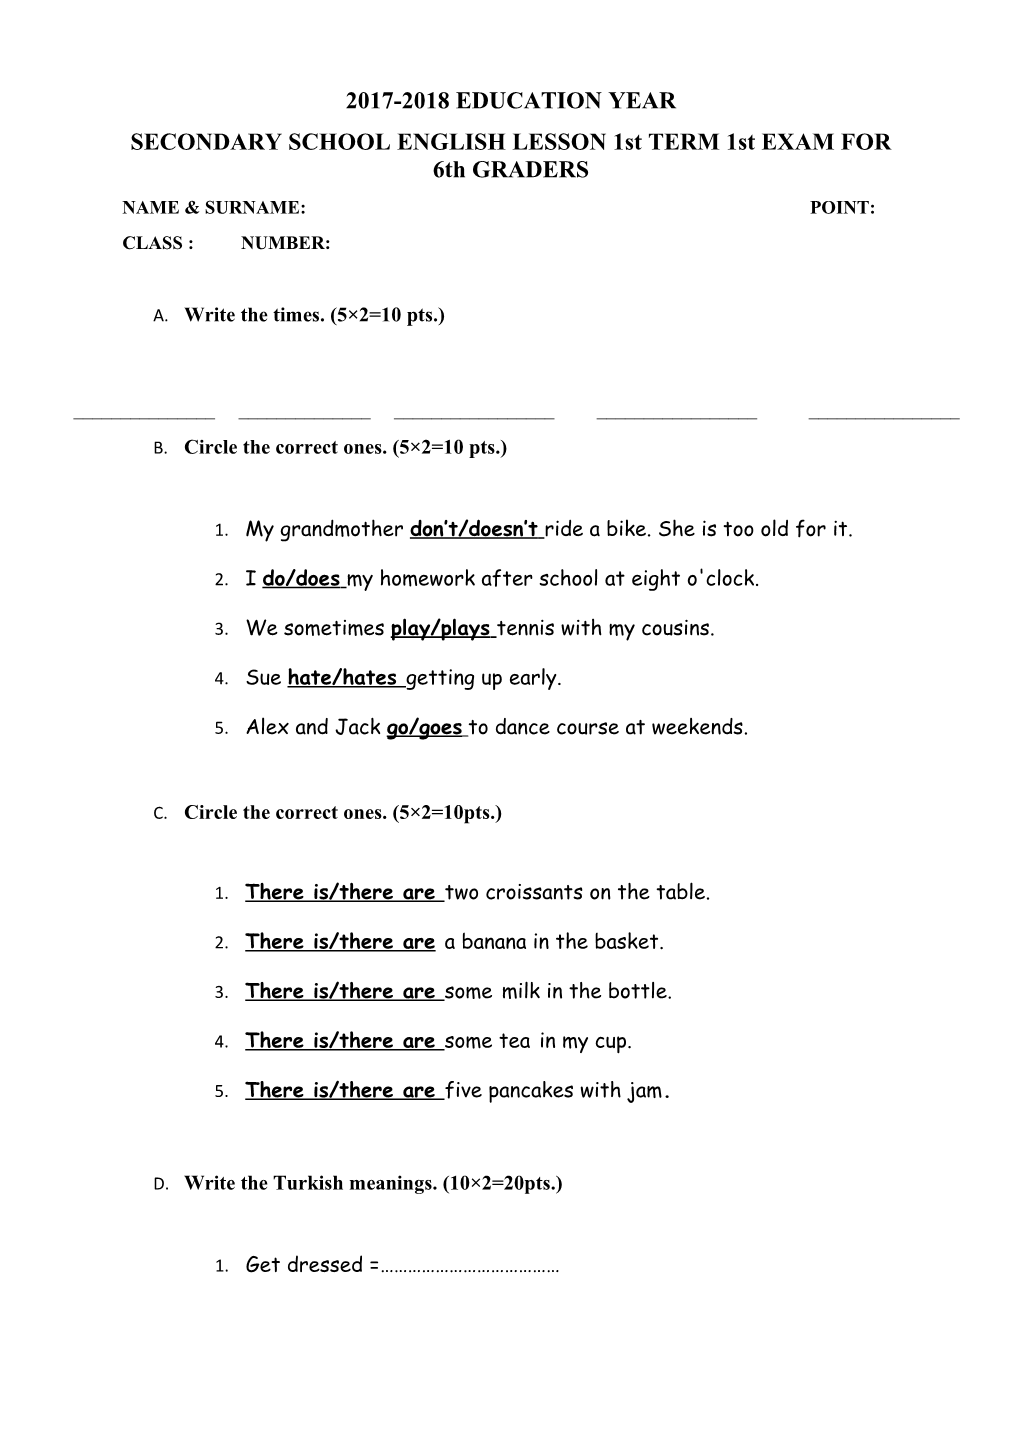 SECONDARY SCHOOL ENGLISH LESSON 1St TERM 1St EXAM for 6Th GRADERS